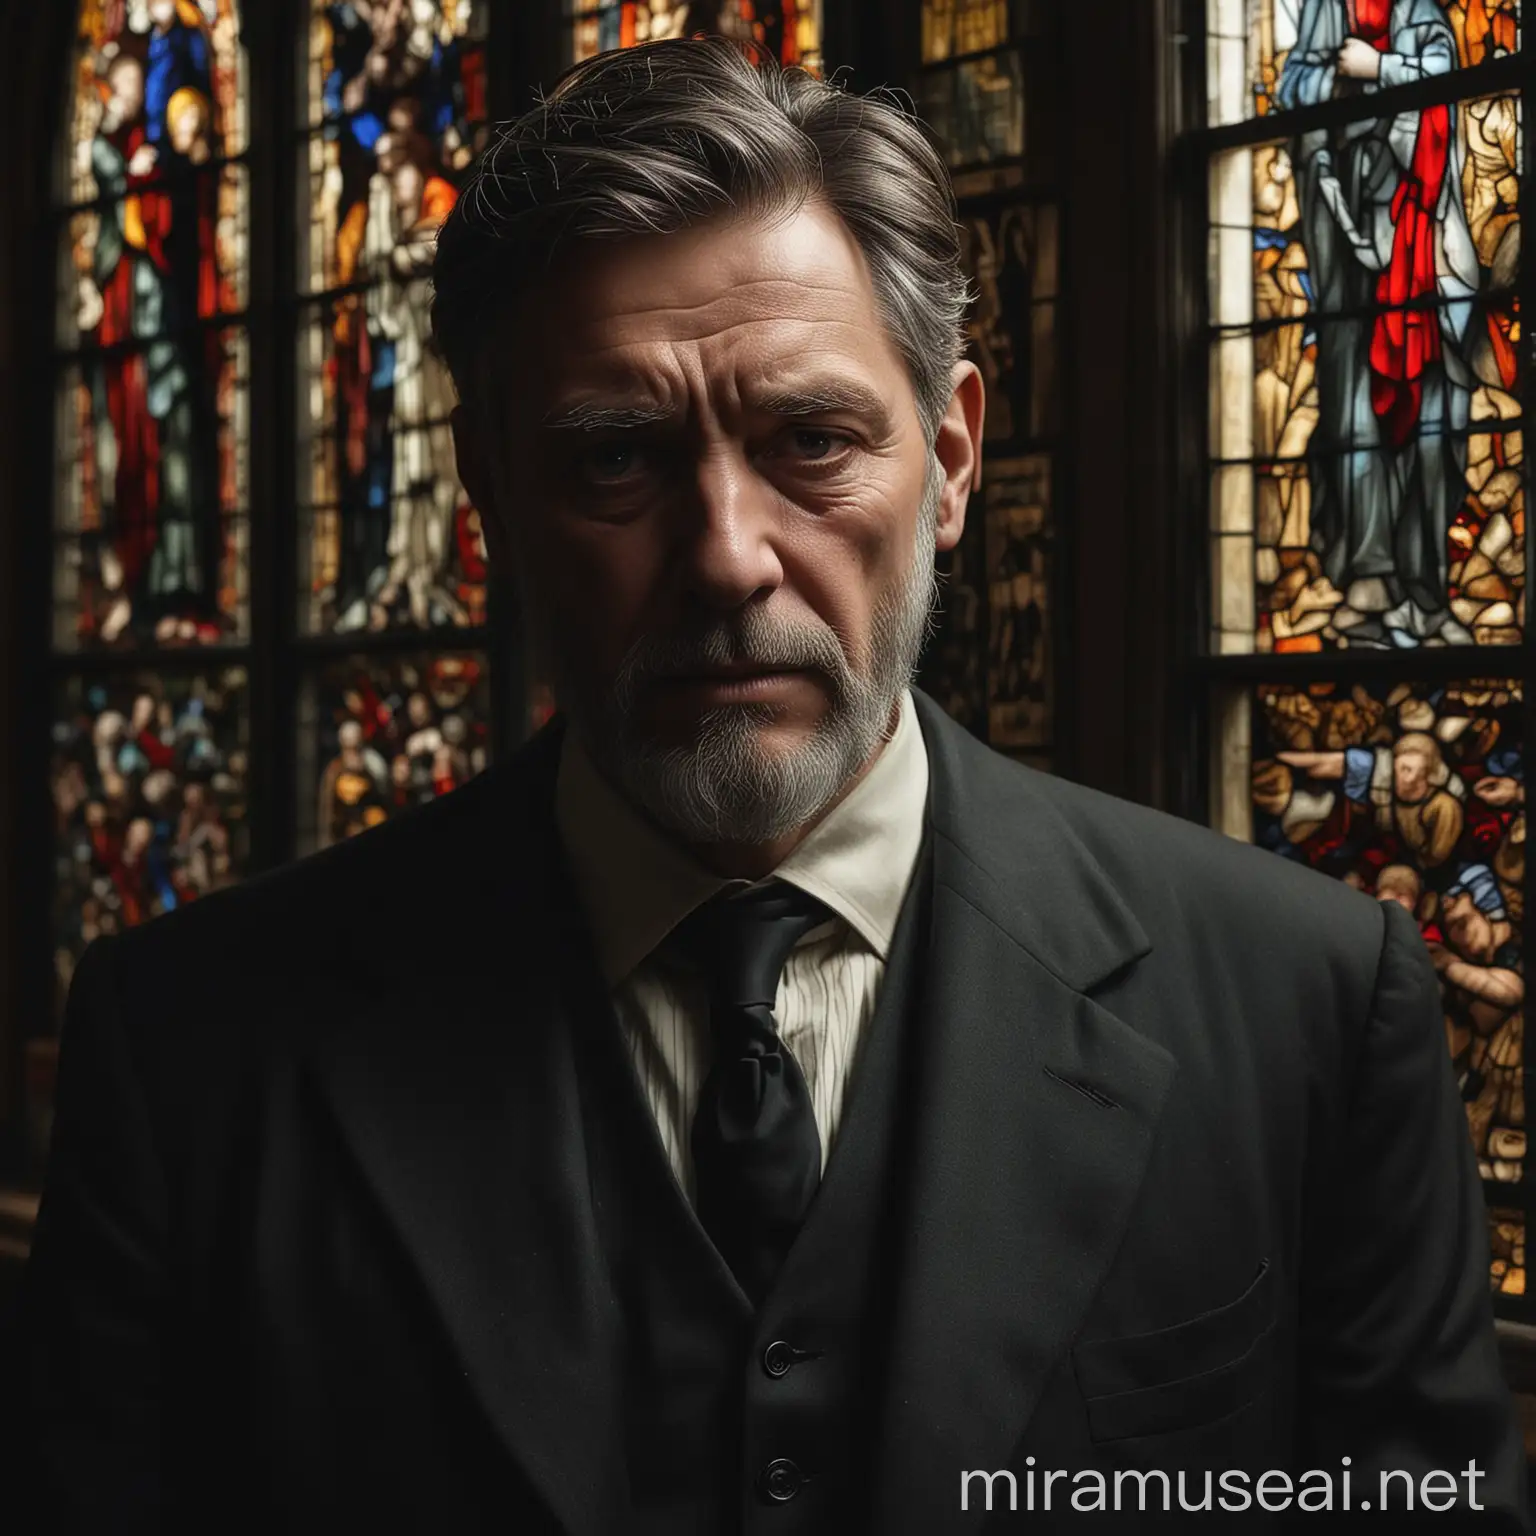 Brooding Man in Church Library Amidst Stained Glass Light